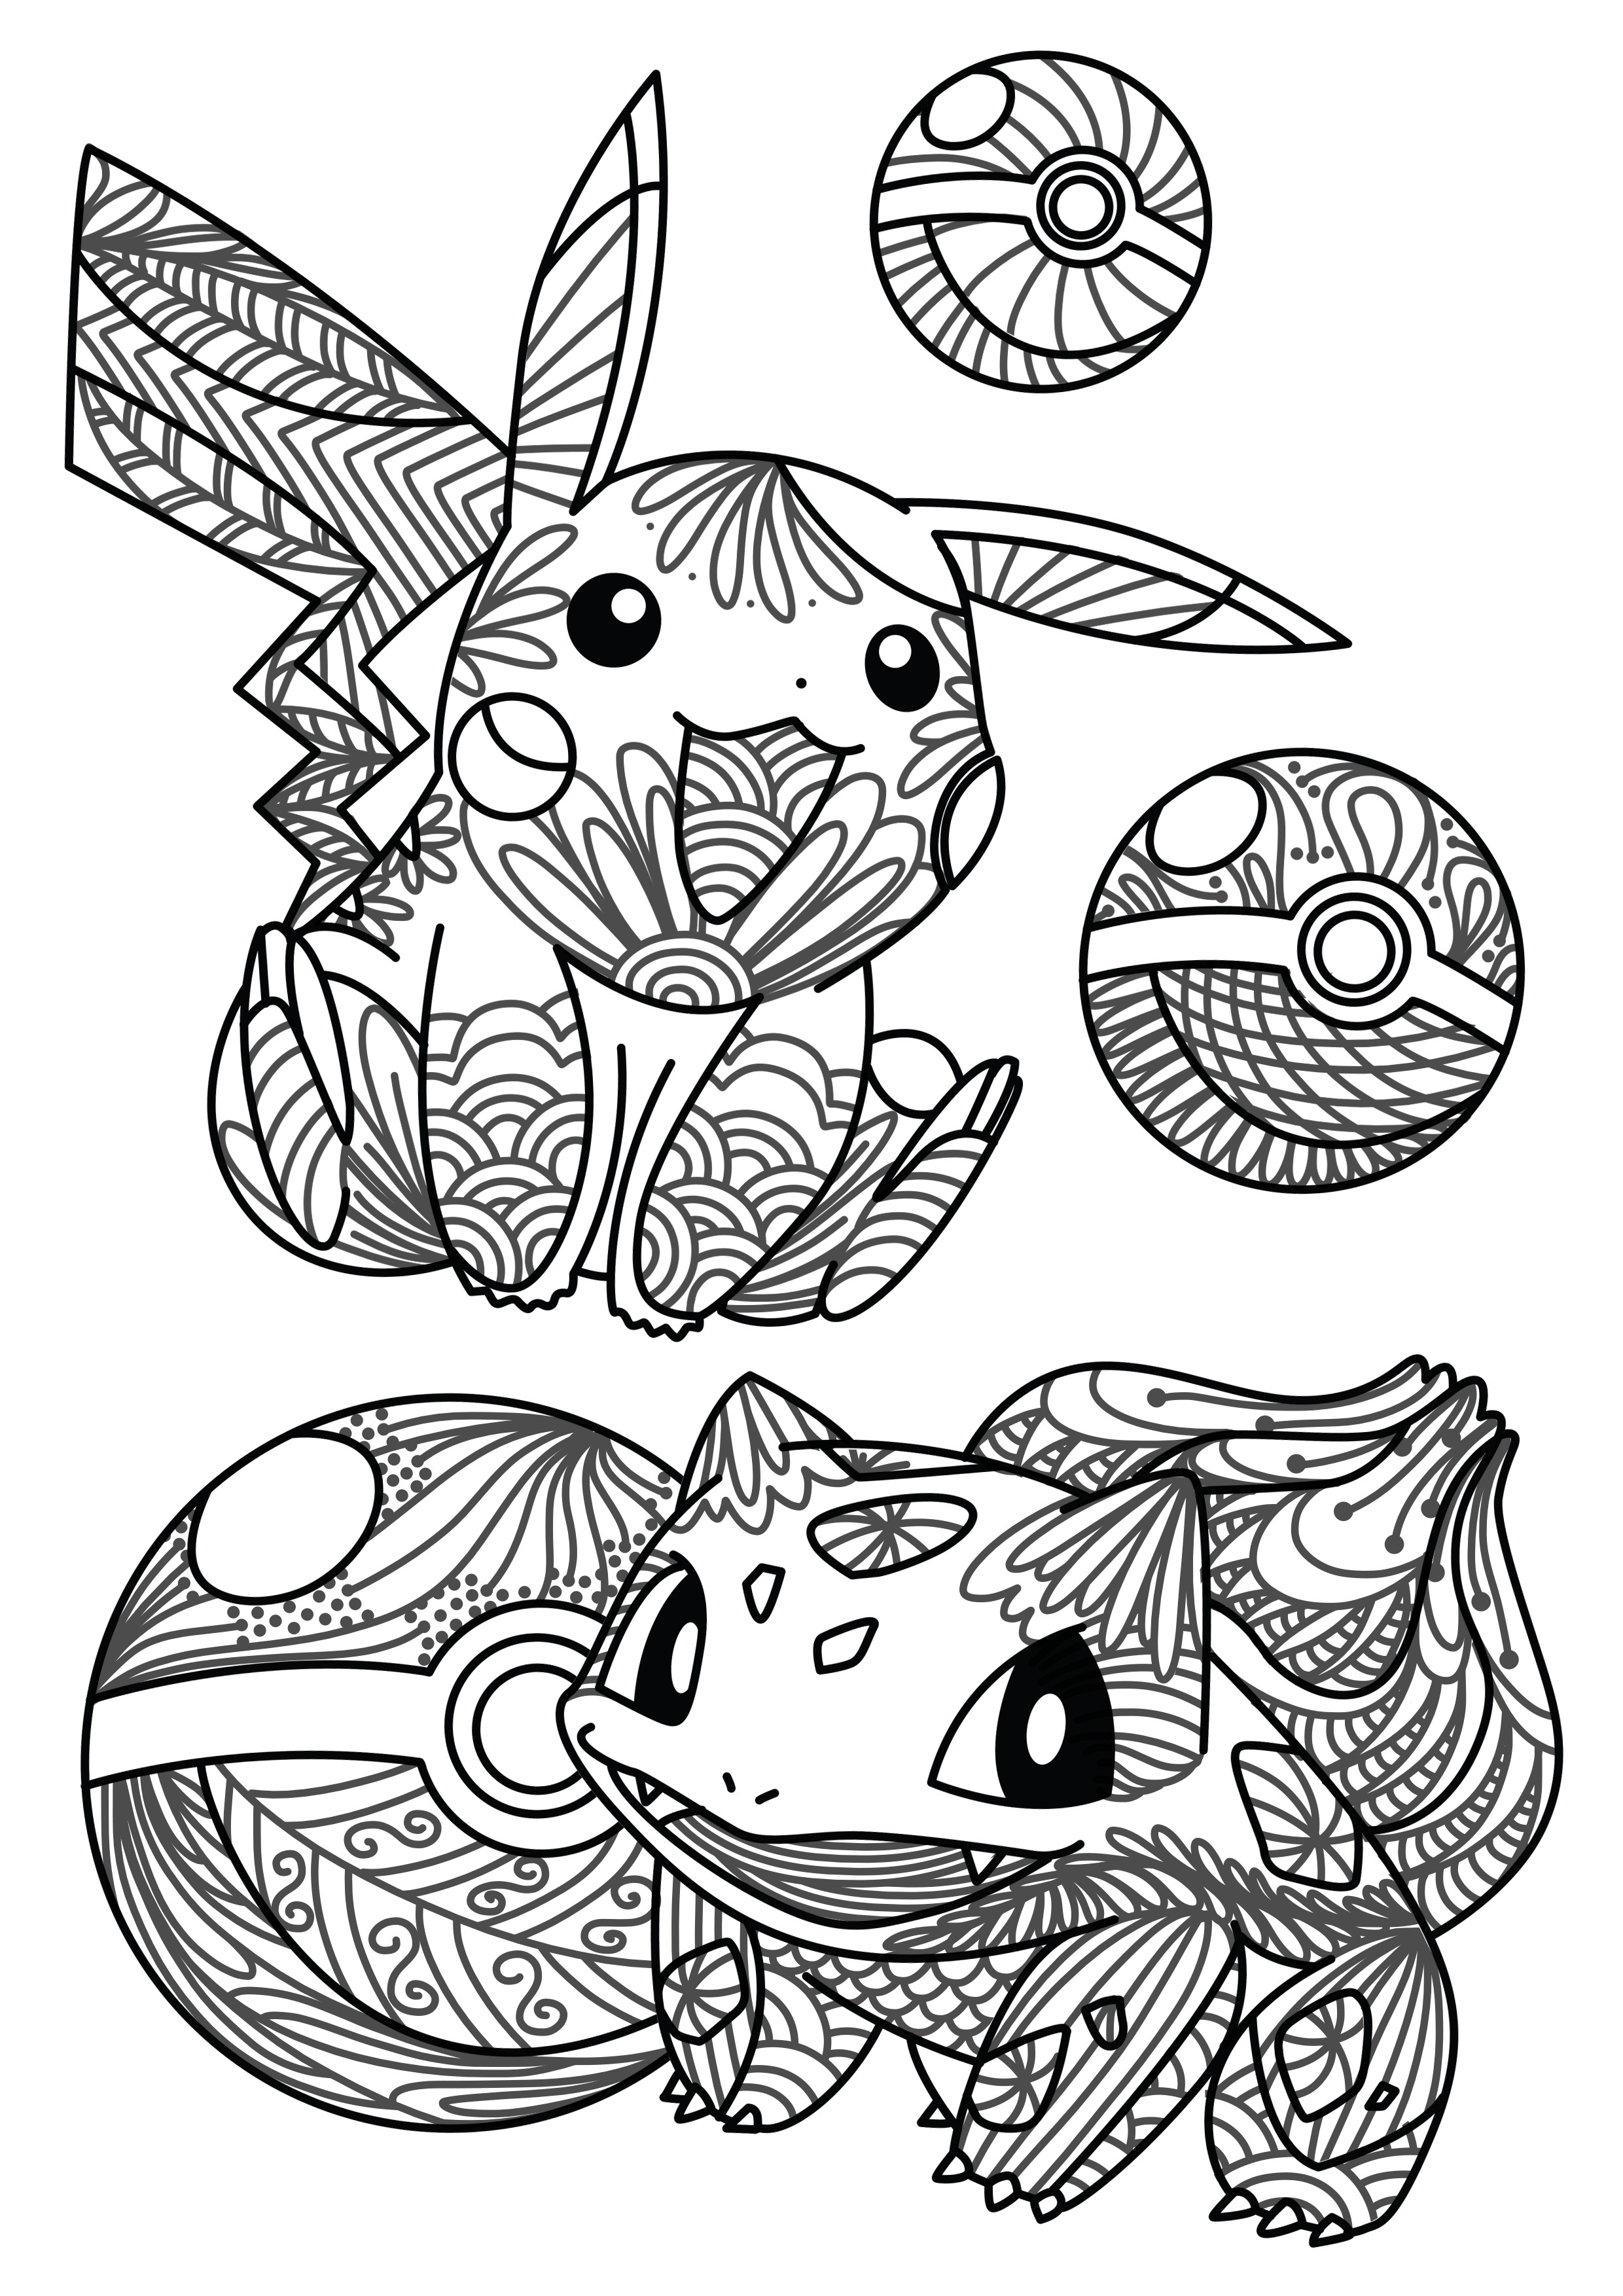 Pokemon Coloring Pages For Adults
 You caught it Free Pokemon Adult Coloring Sheet – Craft